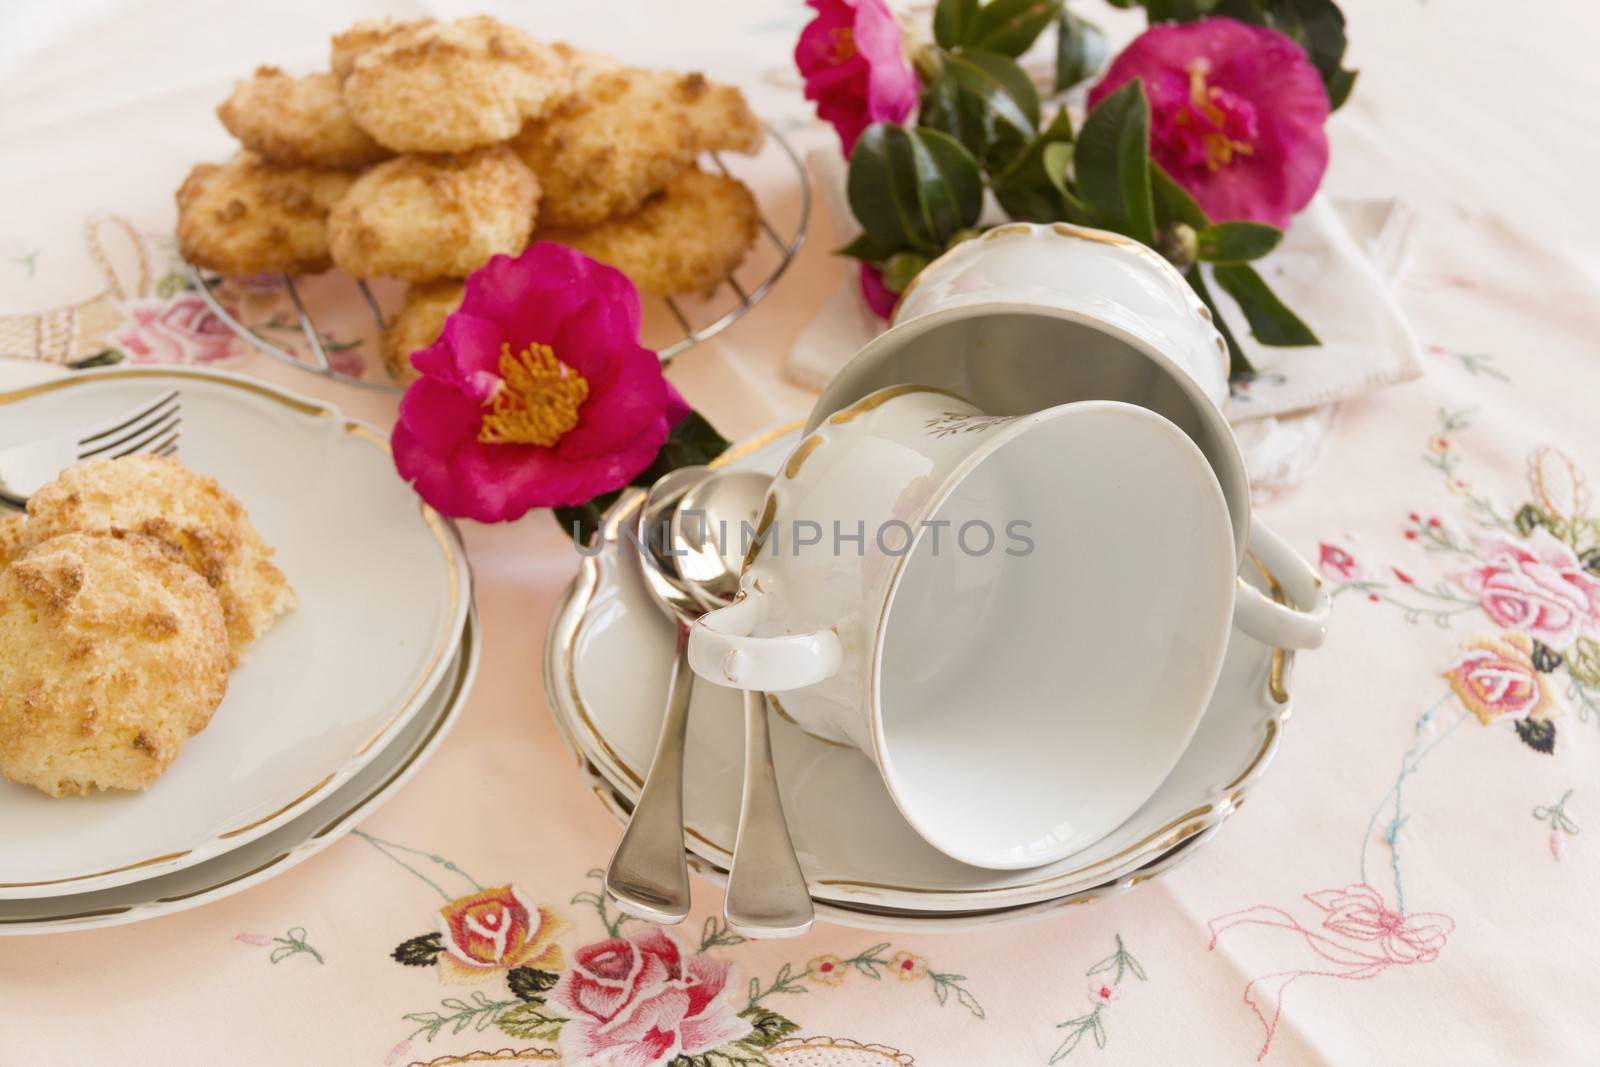 Beautiful camellias with two vintage teacups laying on saucers with coconut macaroons.